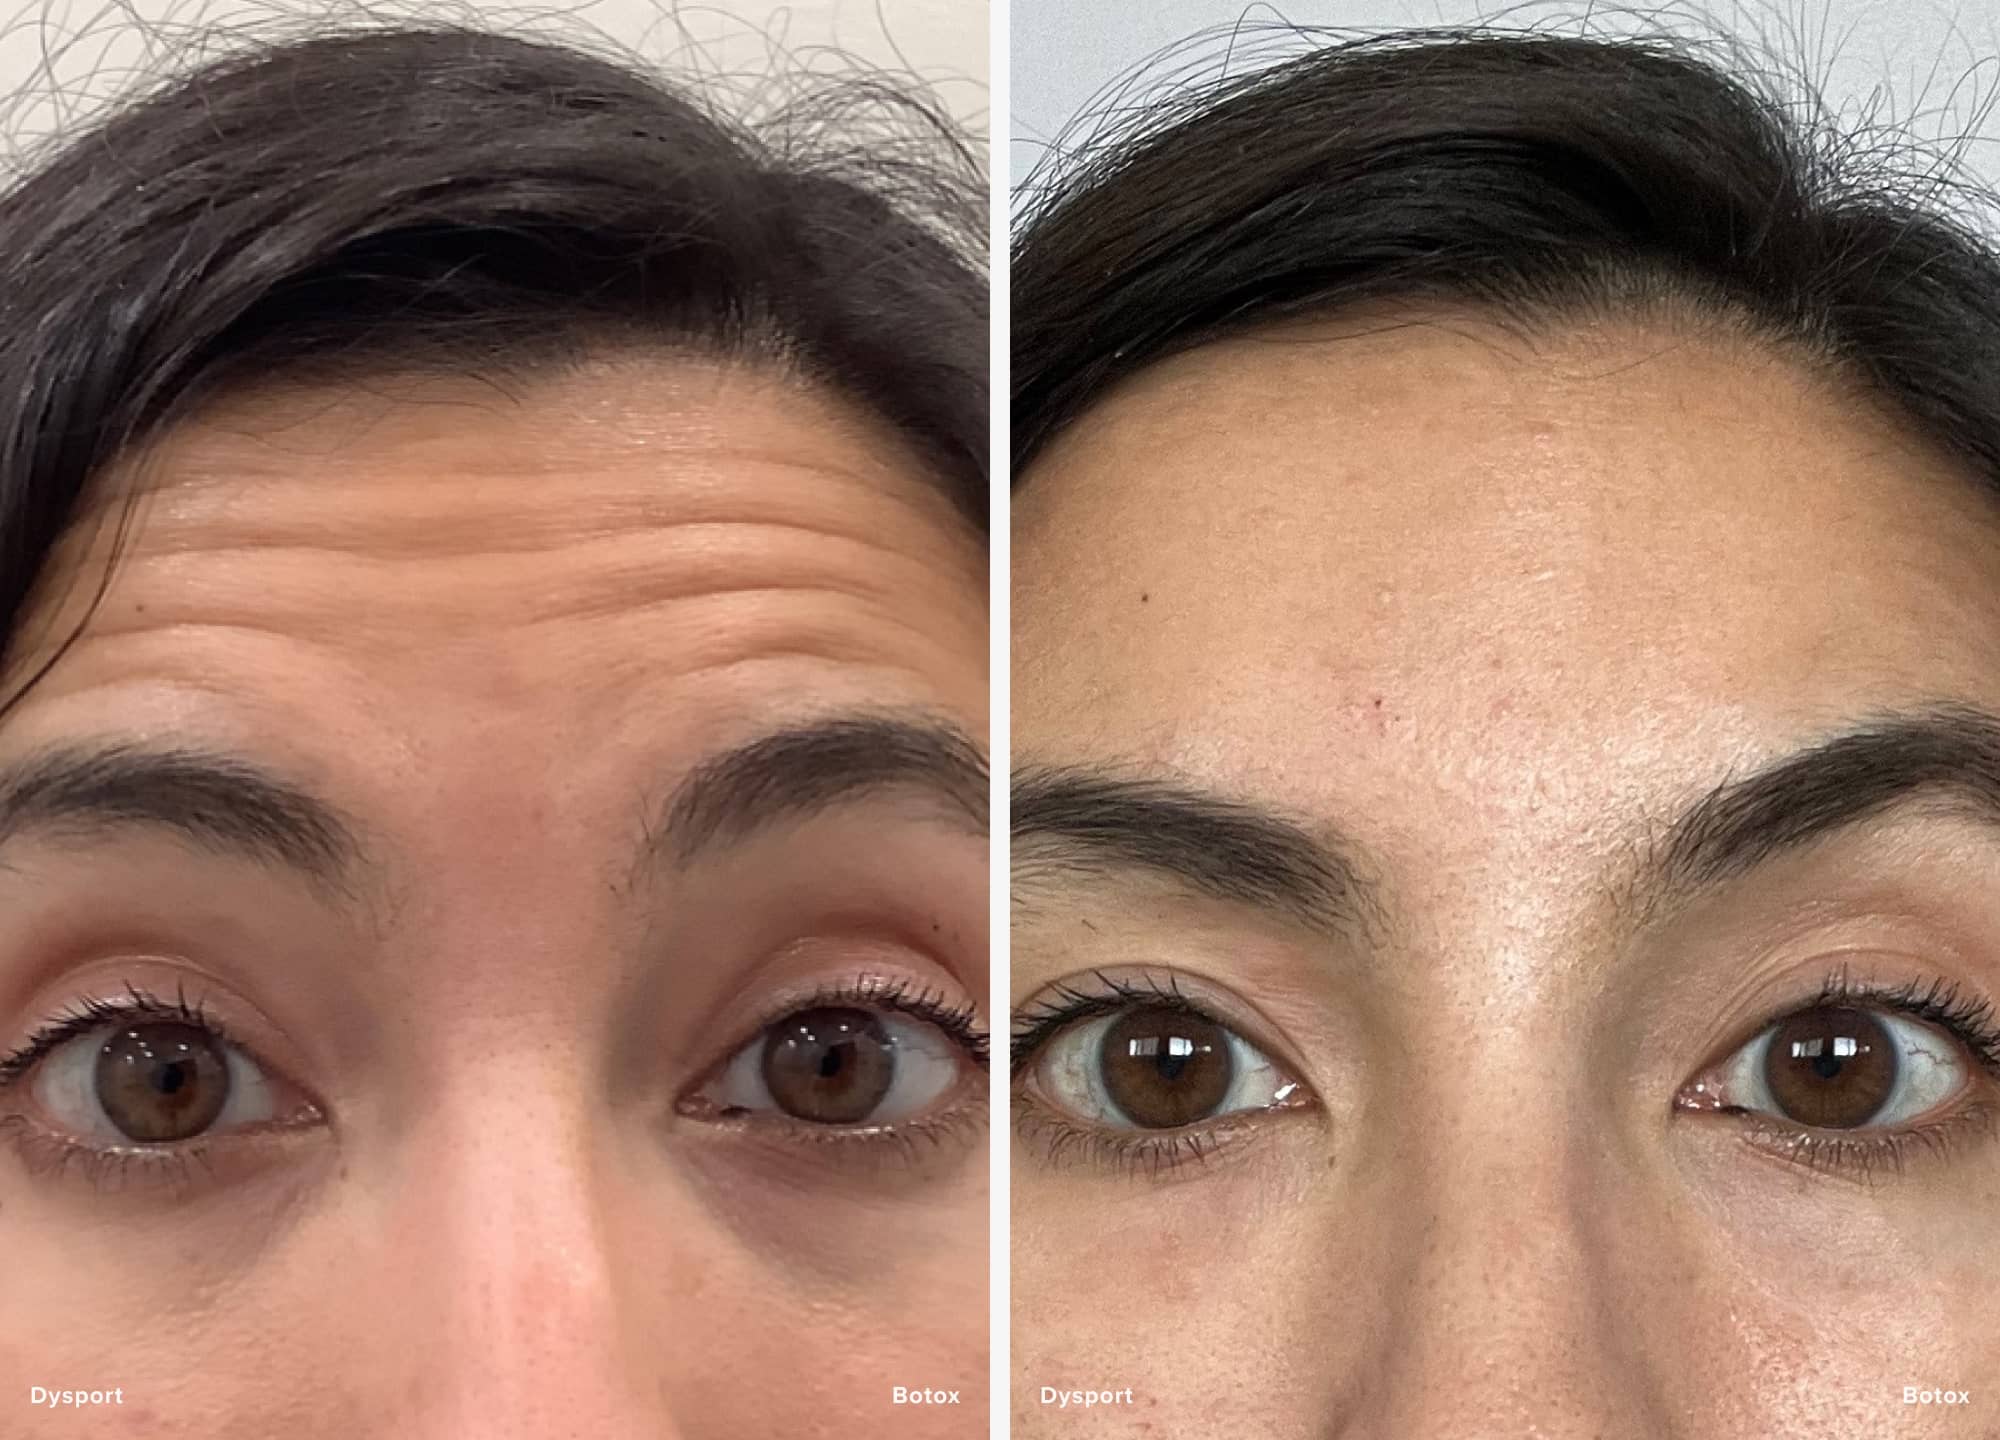 Curious about Botox vs. Dysport? One patient injected half her forehead with Botox and the other half with Dysport. See her results.